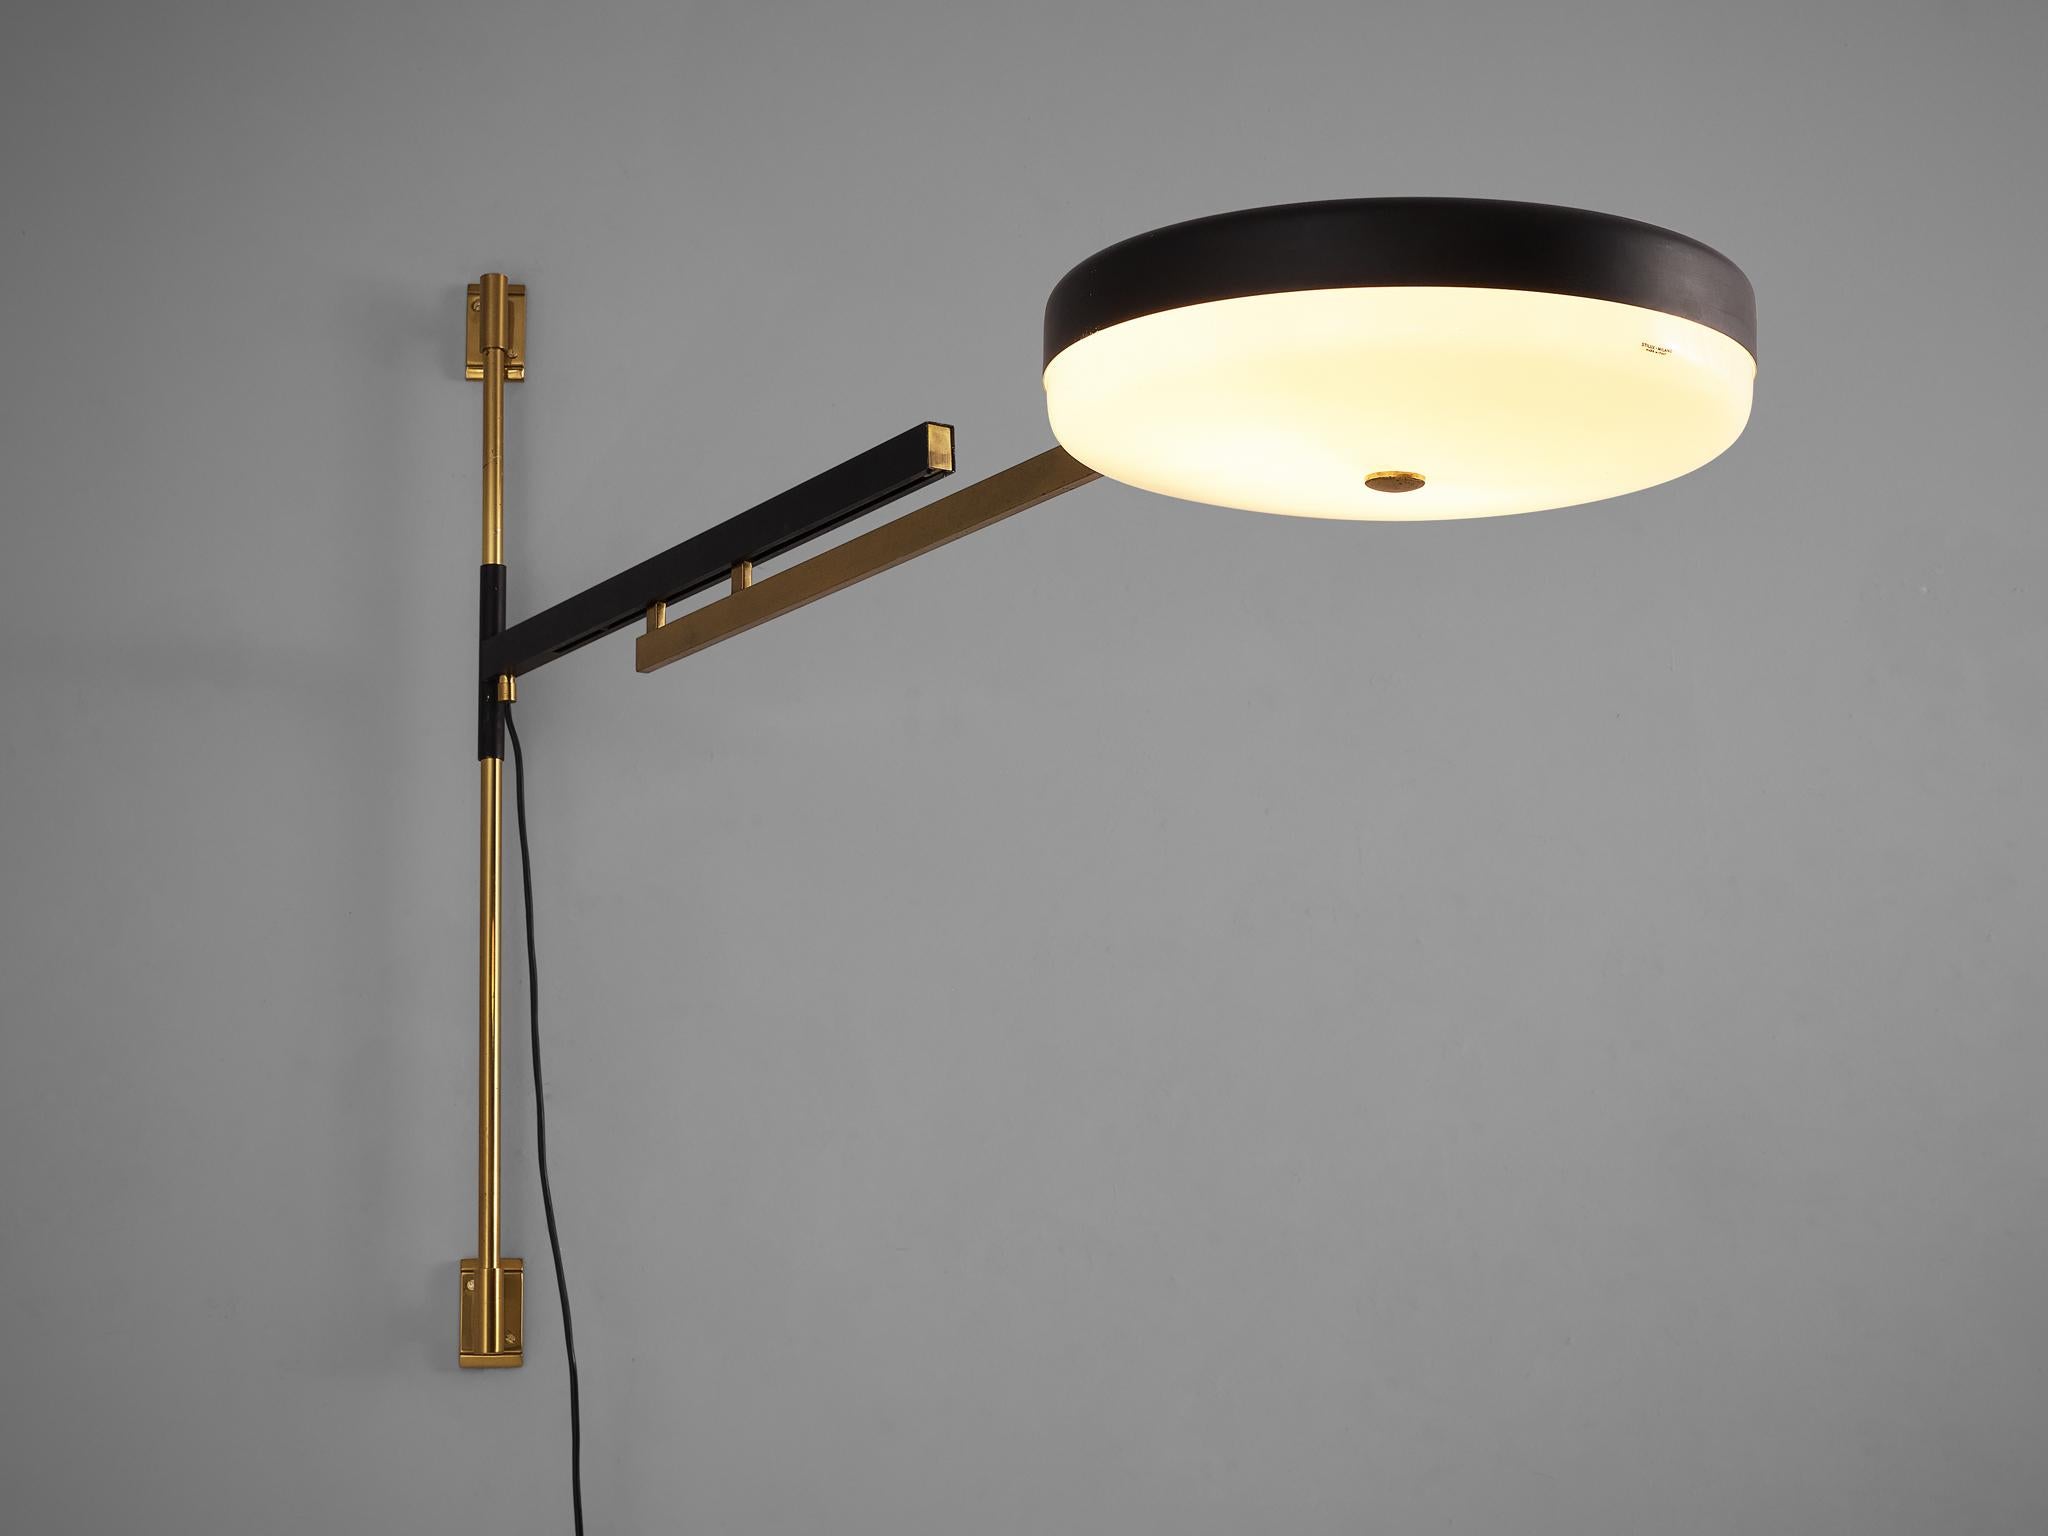 Mid-20th Century Stilux Wall-Mounted Lamp with Adjustable Arms in Brass and Black Metal